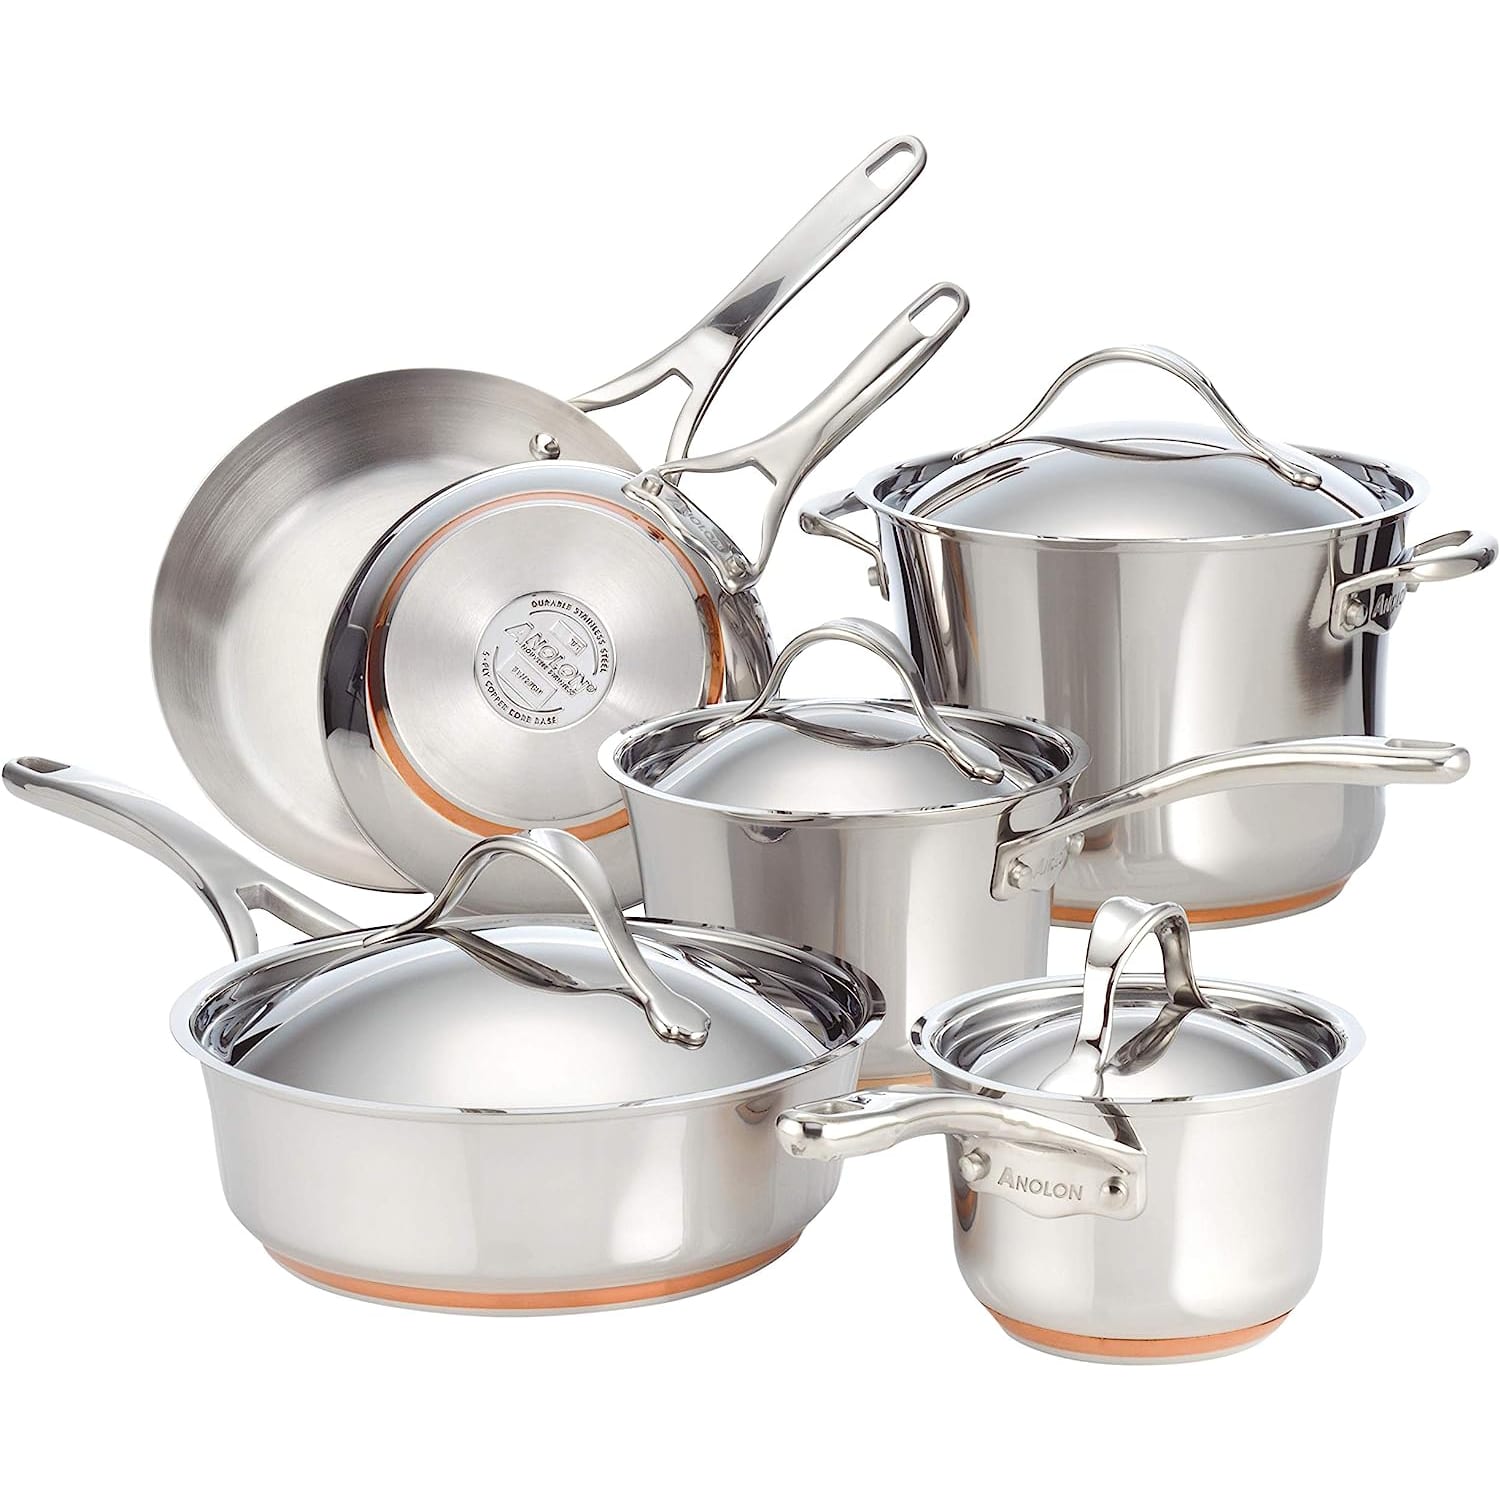 https://cdn.apartmenttherapy.info/image/upload/v1699580344/gen-workflow/product-database/anolon-nouvelle-stainless-steel-cookware-pots-and-pans-10-piece-amazon.jpg